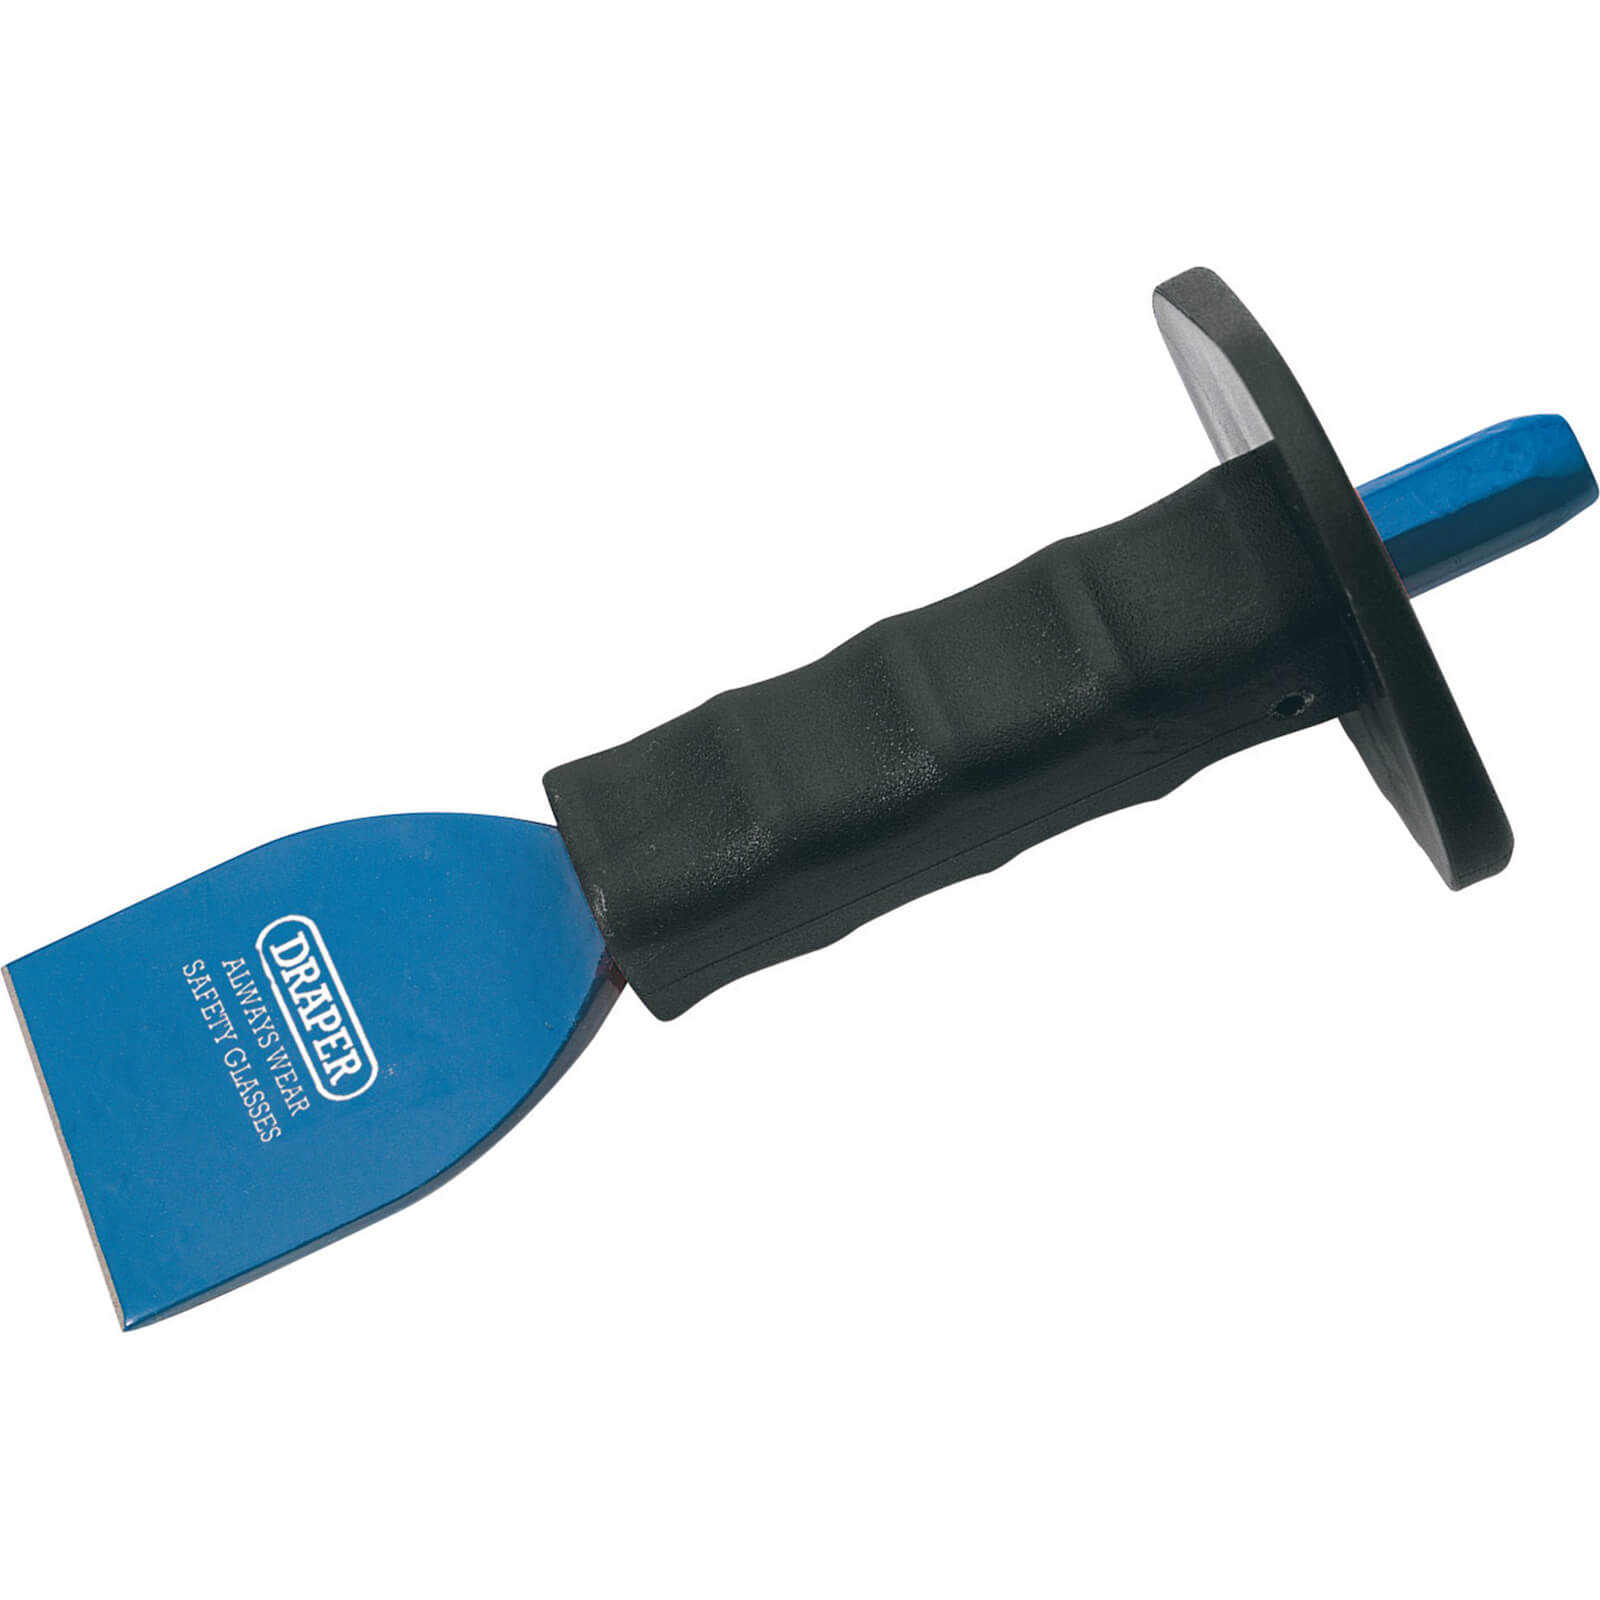 Photo of Draper Electricians Bolster Chisel And Hand Guard 60mm